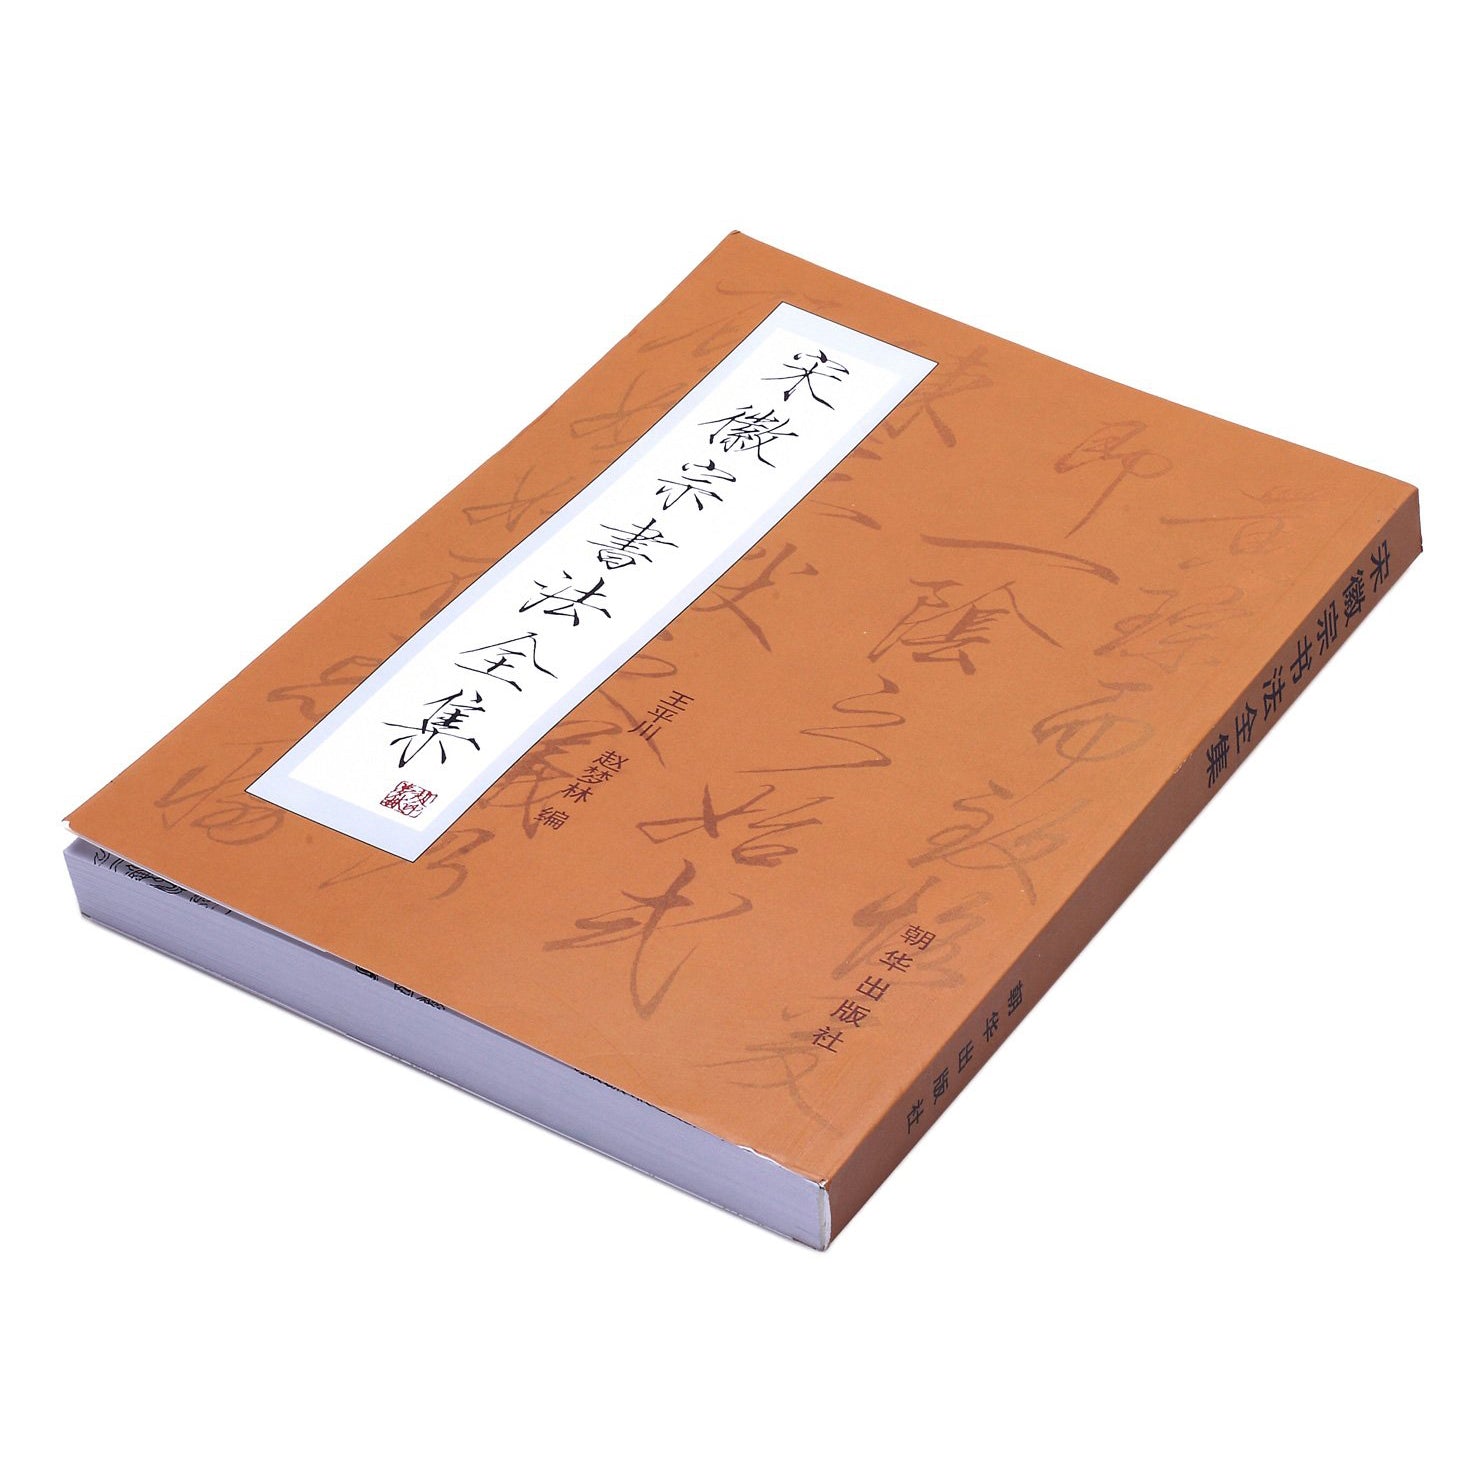 front view of the book calligraphy collection of emperor huizong of the song dynasty